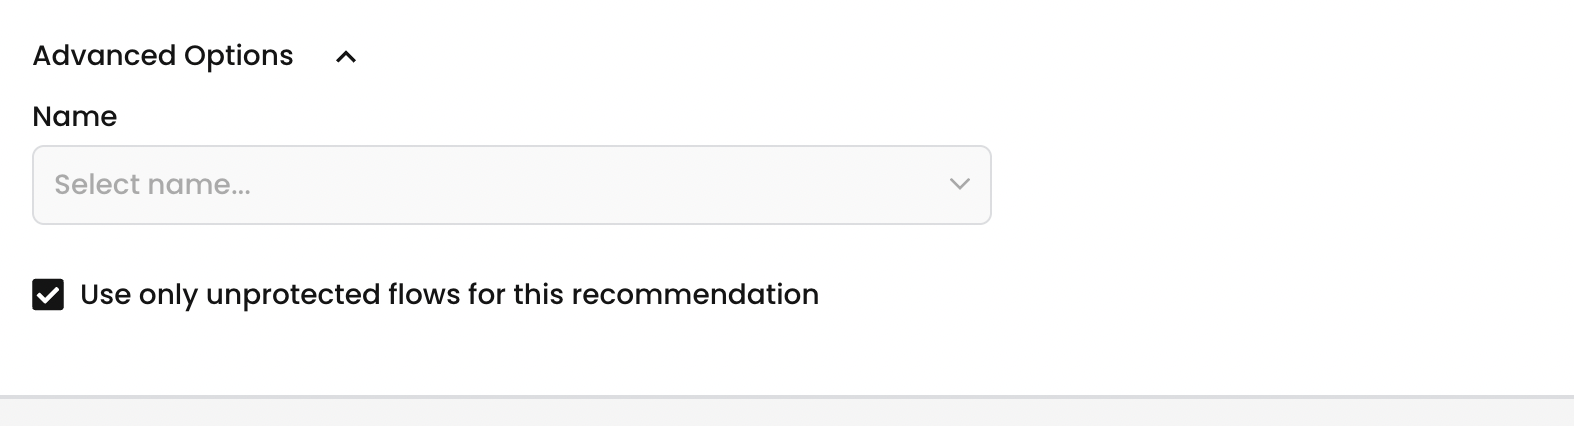 Create a Policy Recommendation